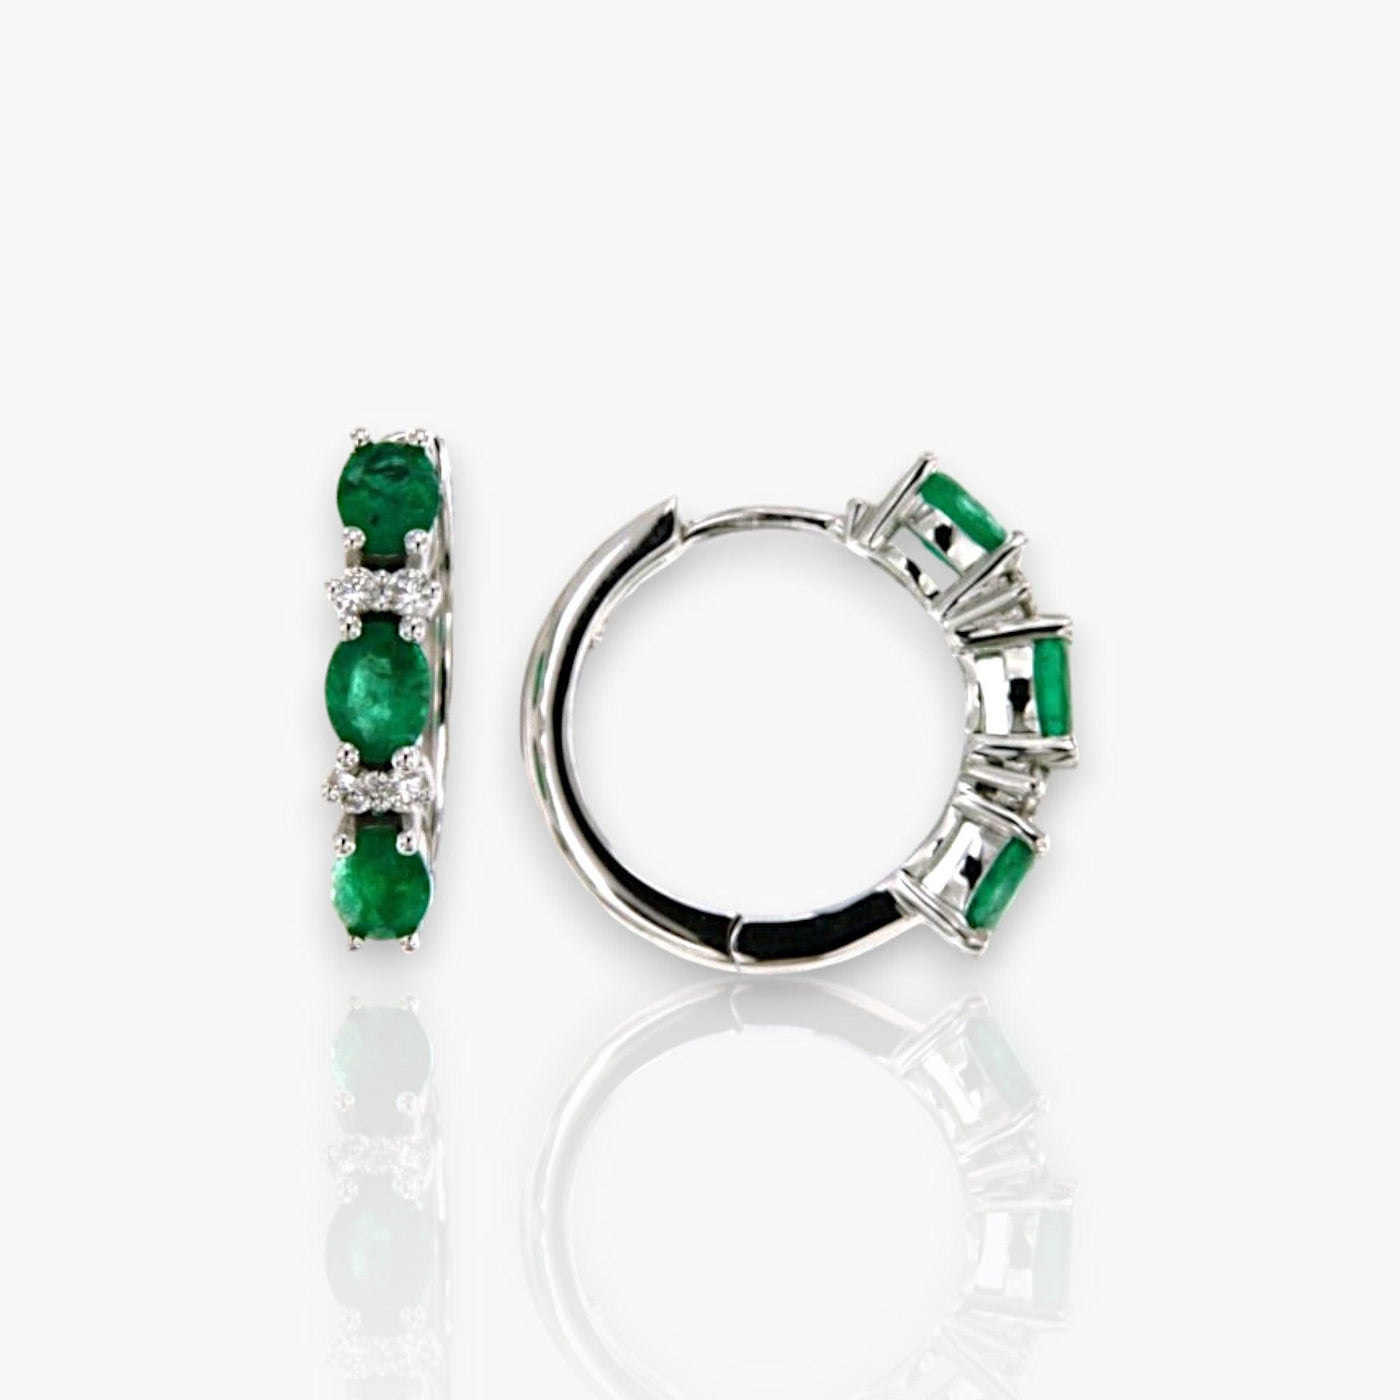 Pair of hinged diamond earrings with Sapphires, Emerald or Rubies - Moregola Fine Jewelry